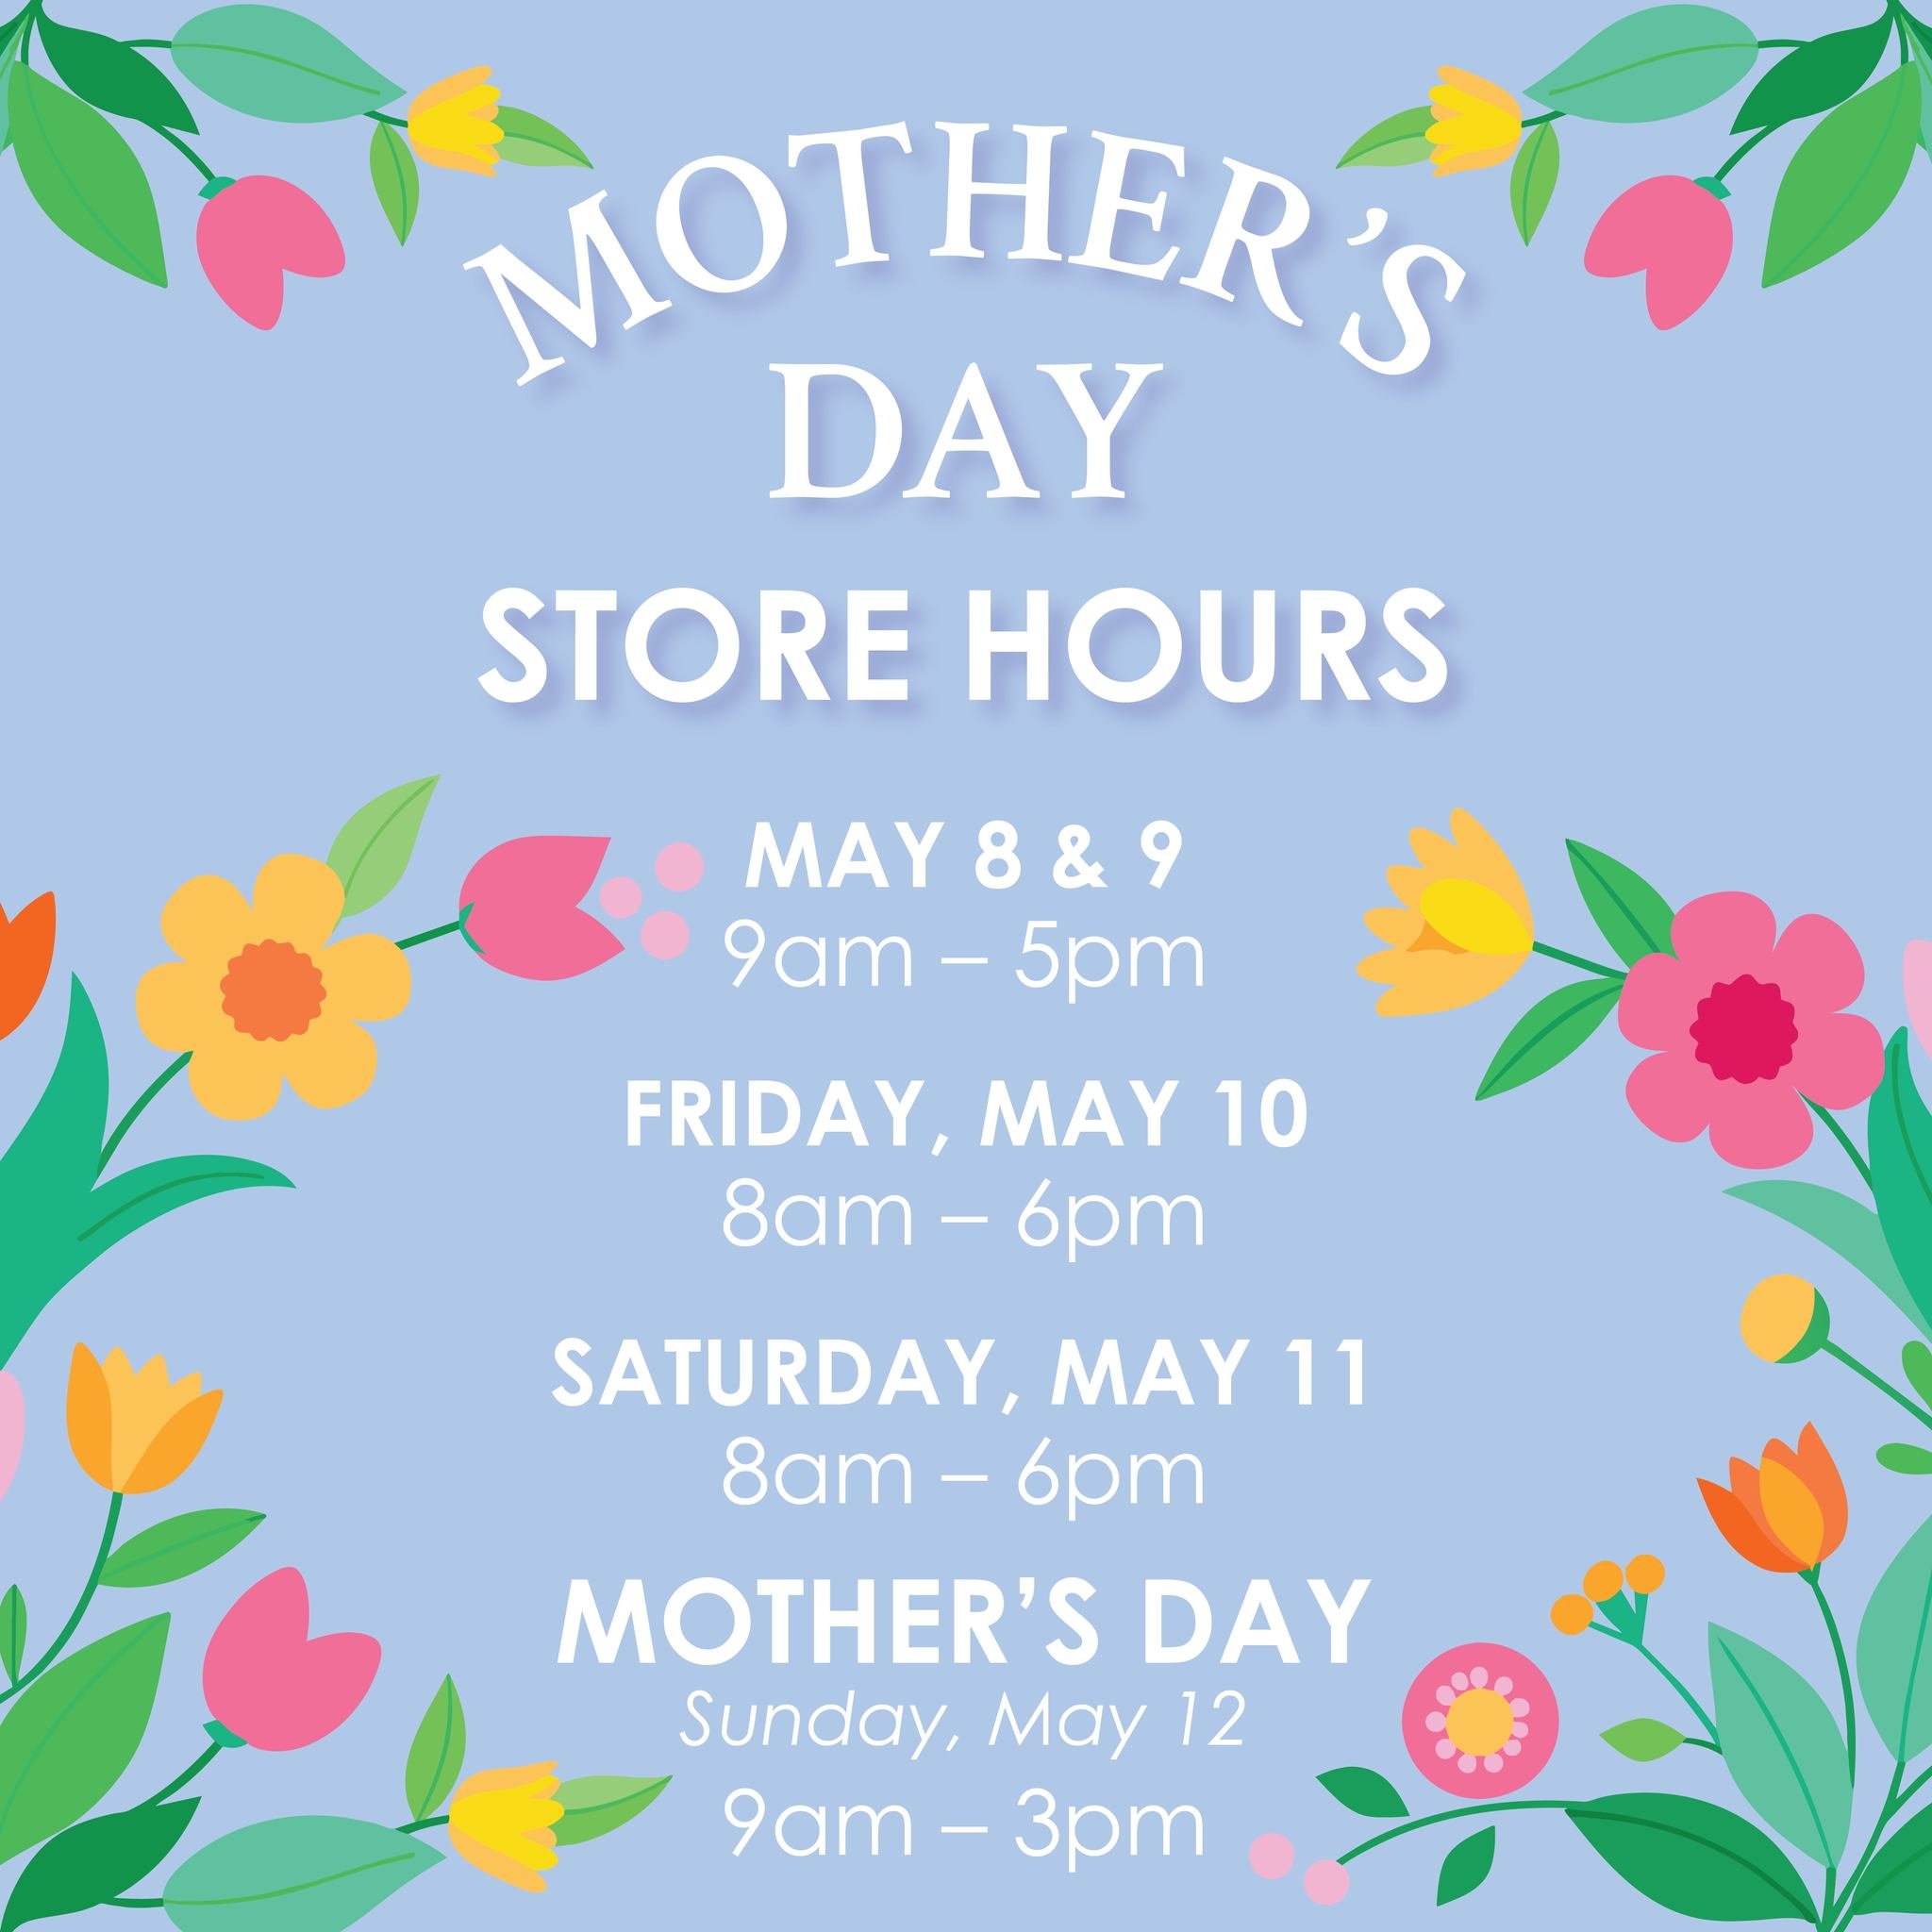 We will be open extended hours this week for all your shopping needs!
Don&rsquo;t forget that Mother&rsquo;s Day is Sunday!

#StoreHours #MothersDay2024 #VisitUs